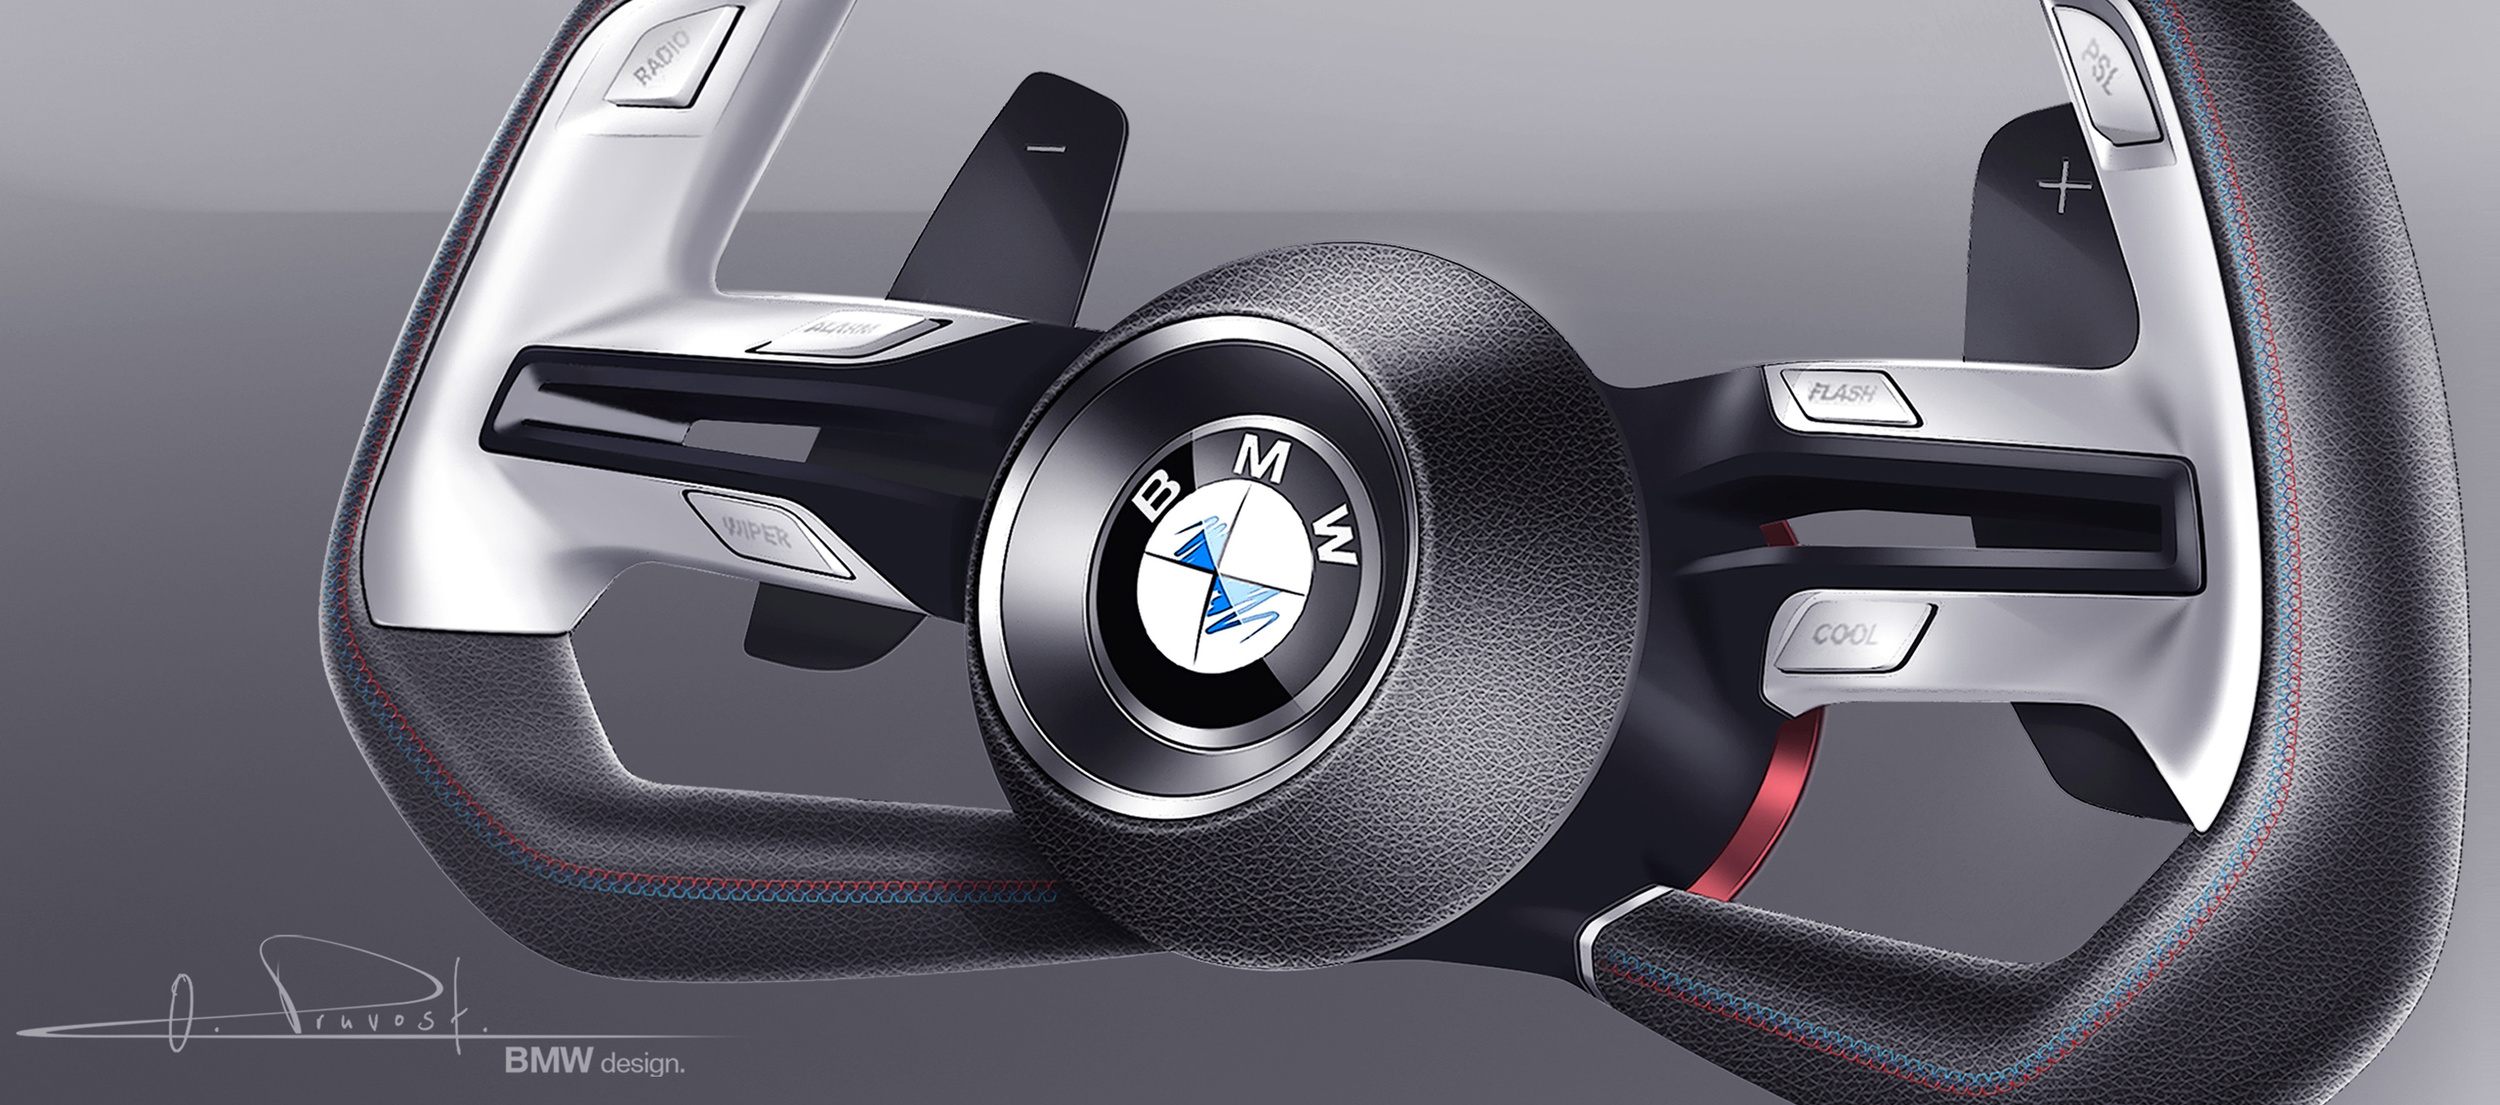 BMW concept cars to break cover at Monterey